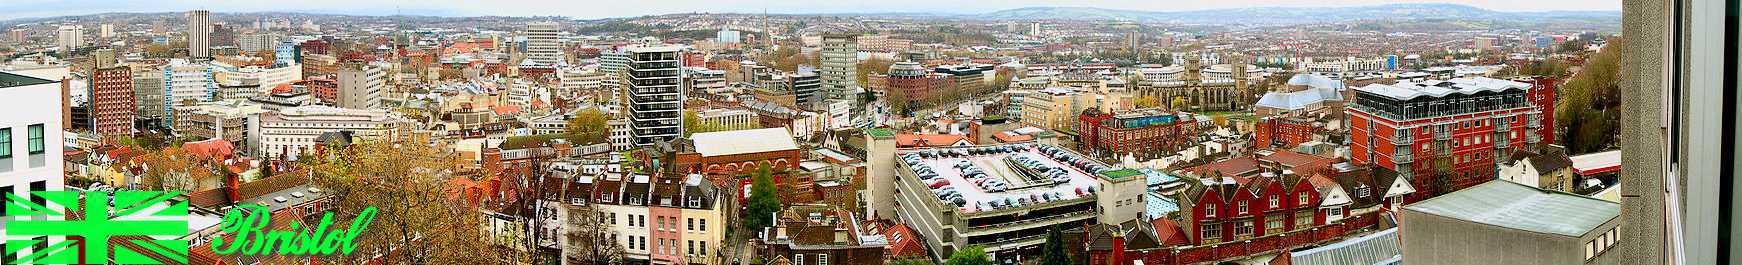 A panoramic view looking over a
                                cityscape of office blocks, old
                                buildings, church spires and a
                                multi-story car park. In the distance
                                hills.